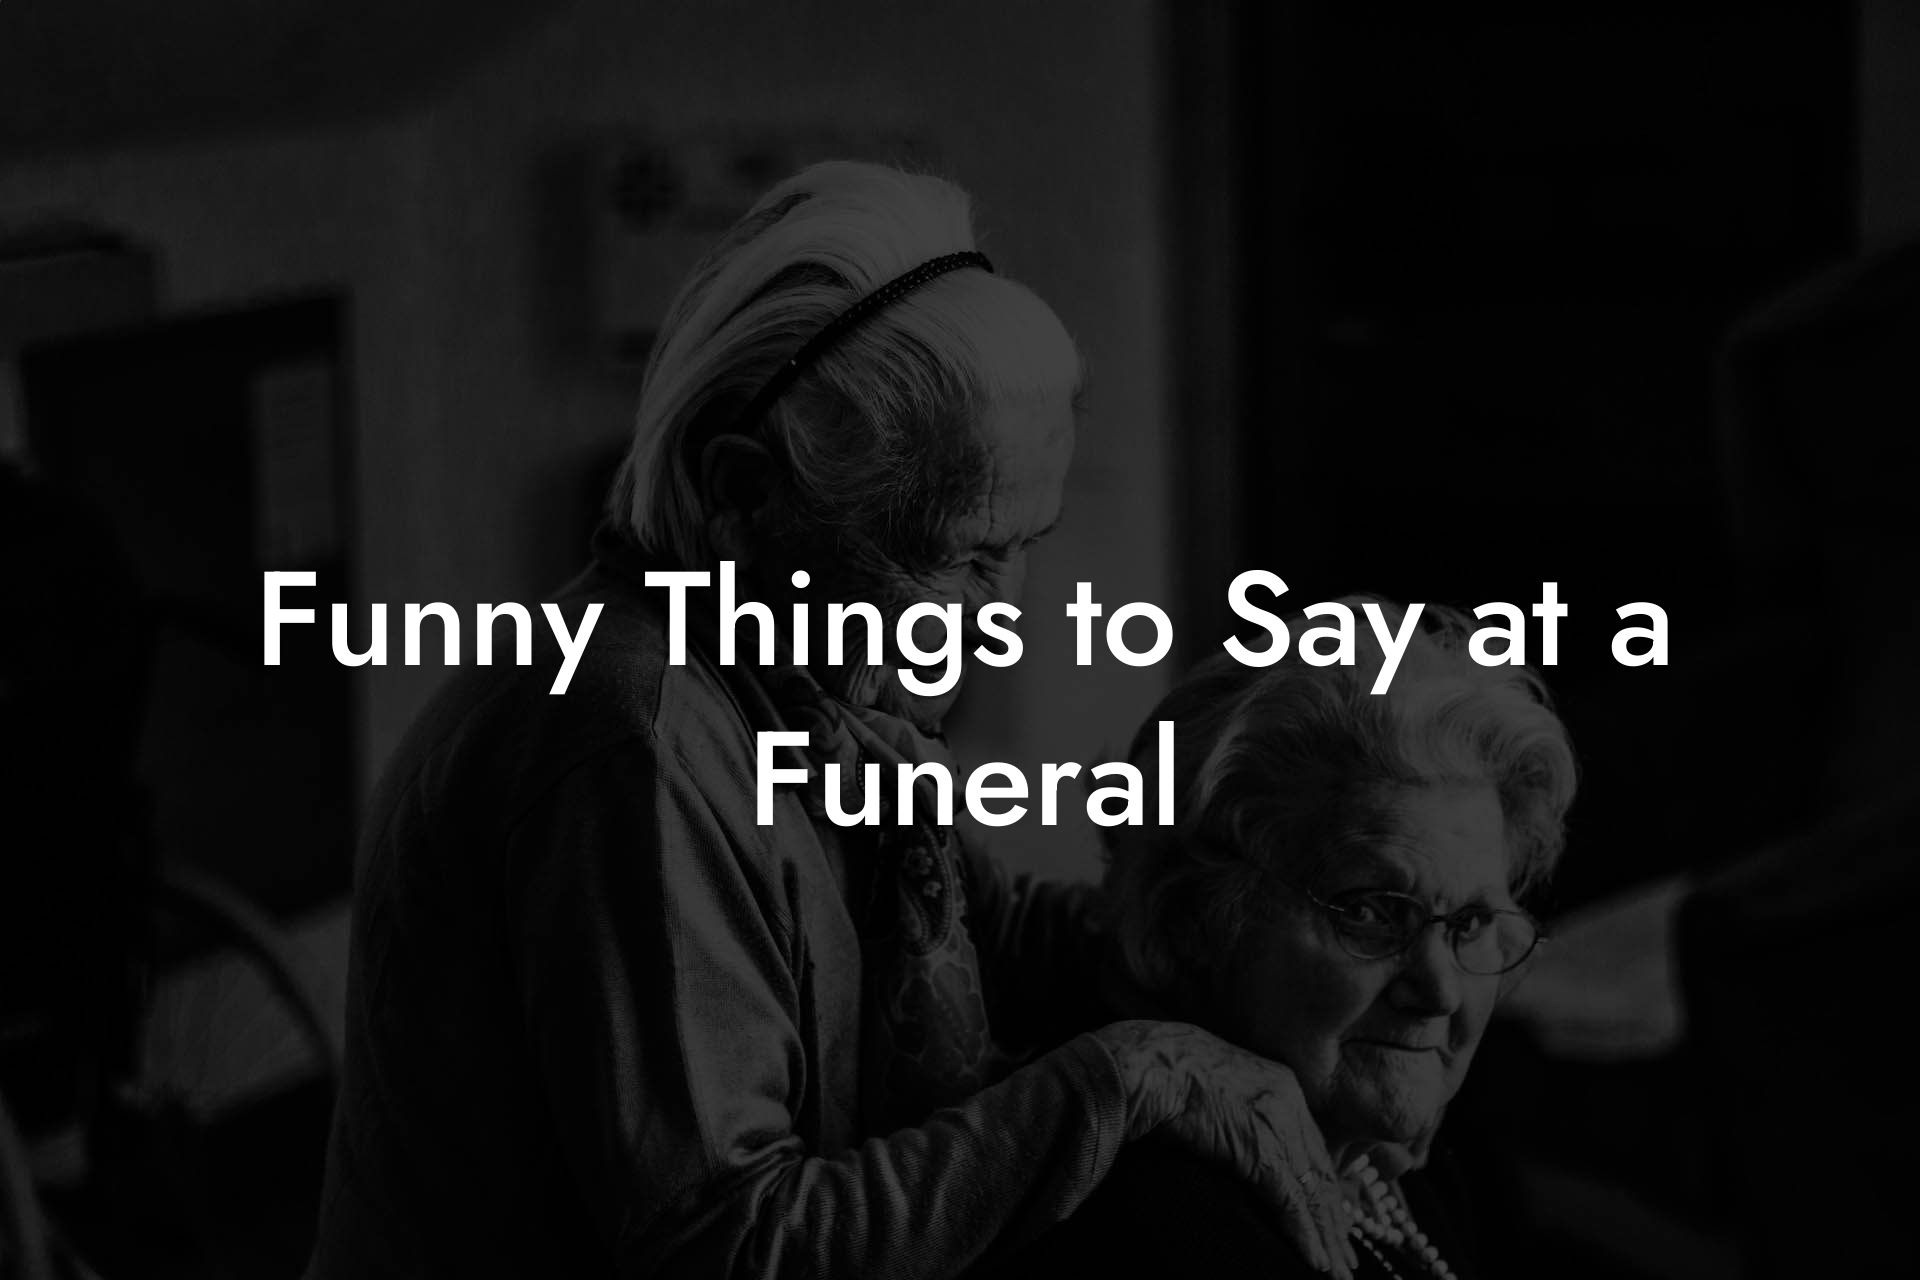 Funny Things to Say at a Funeral